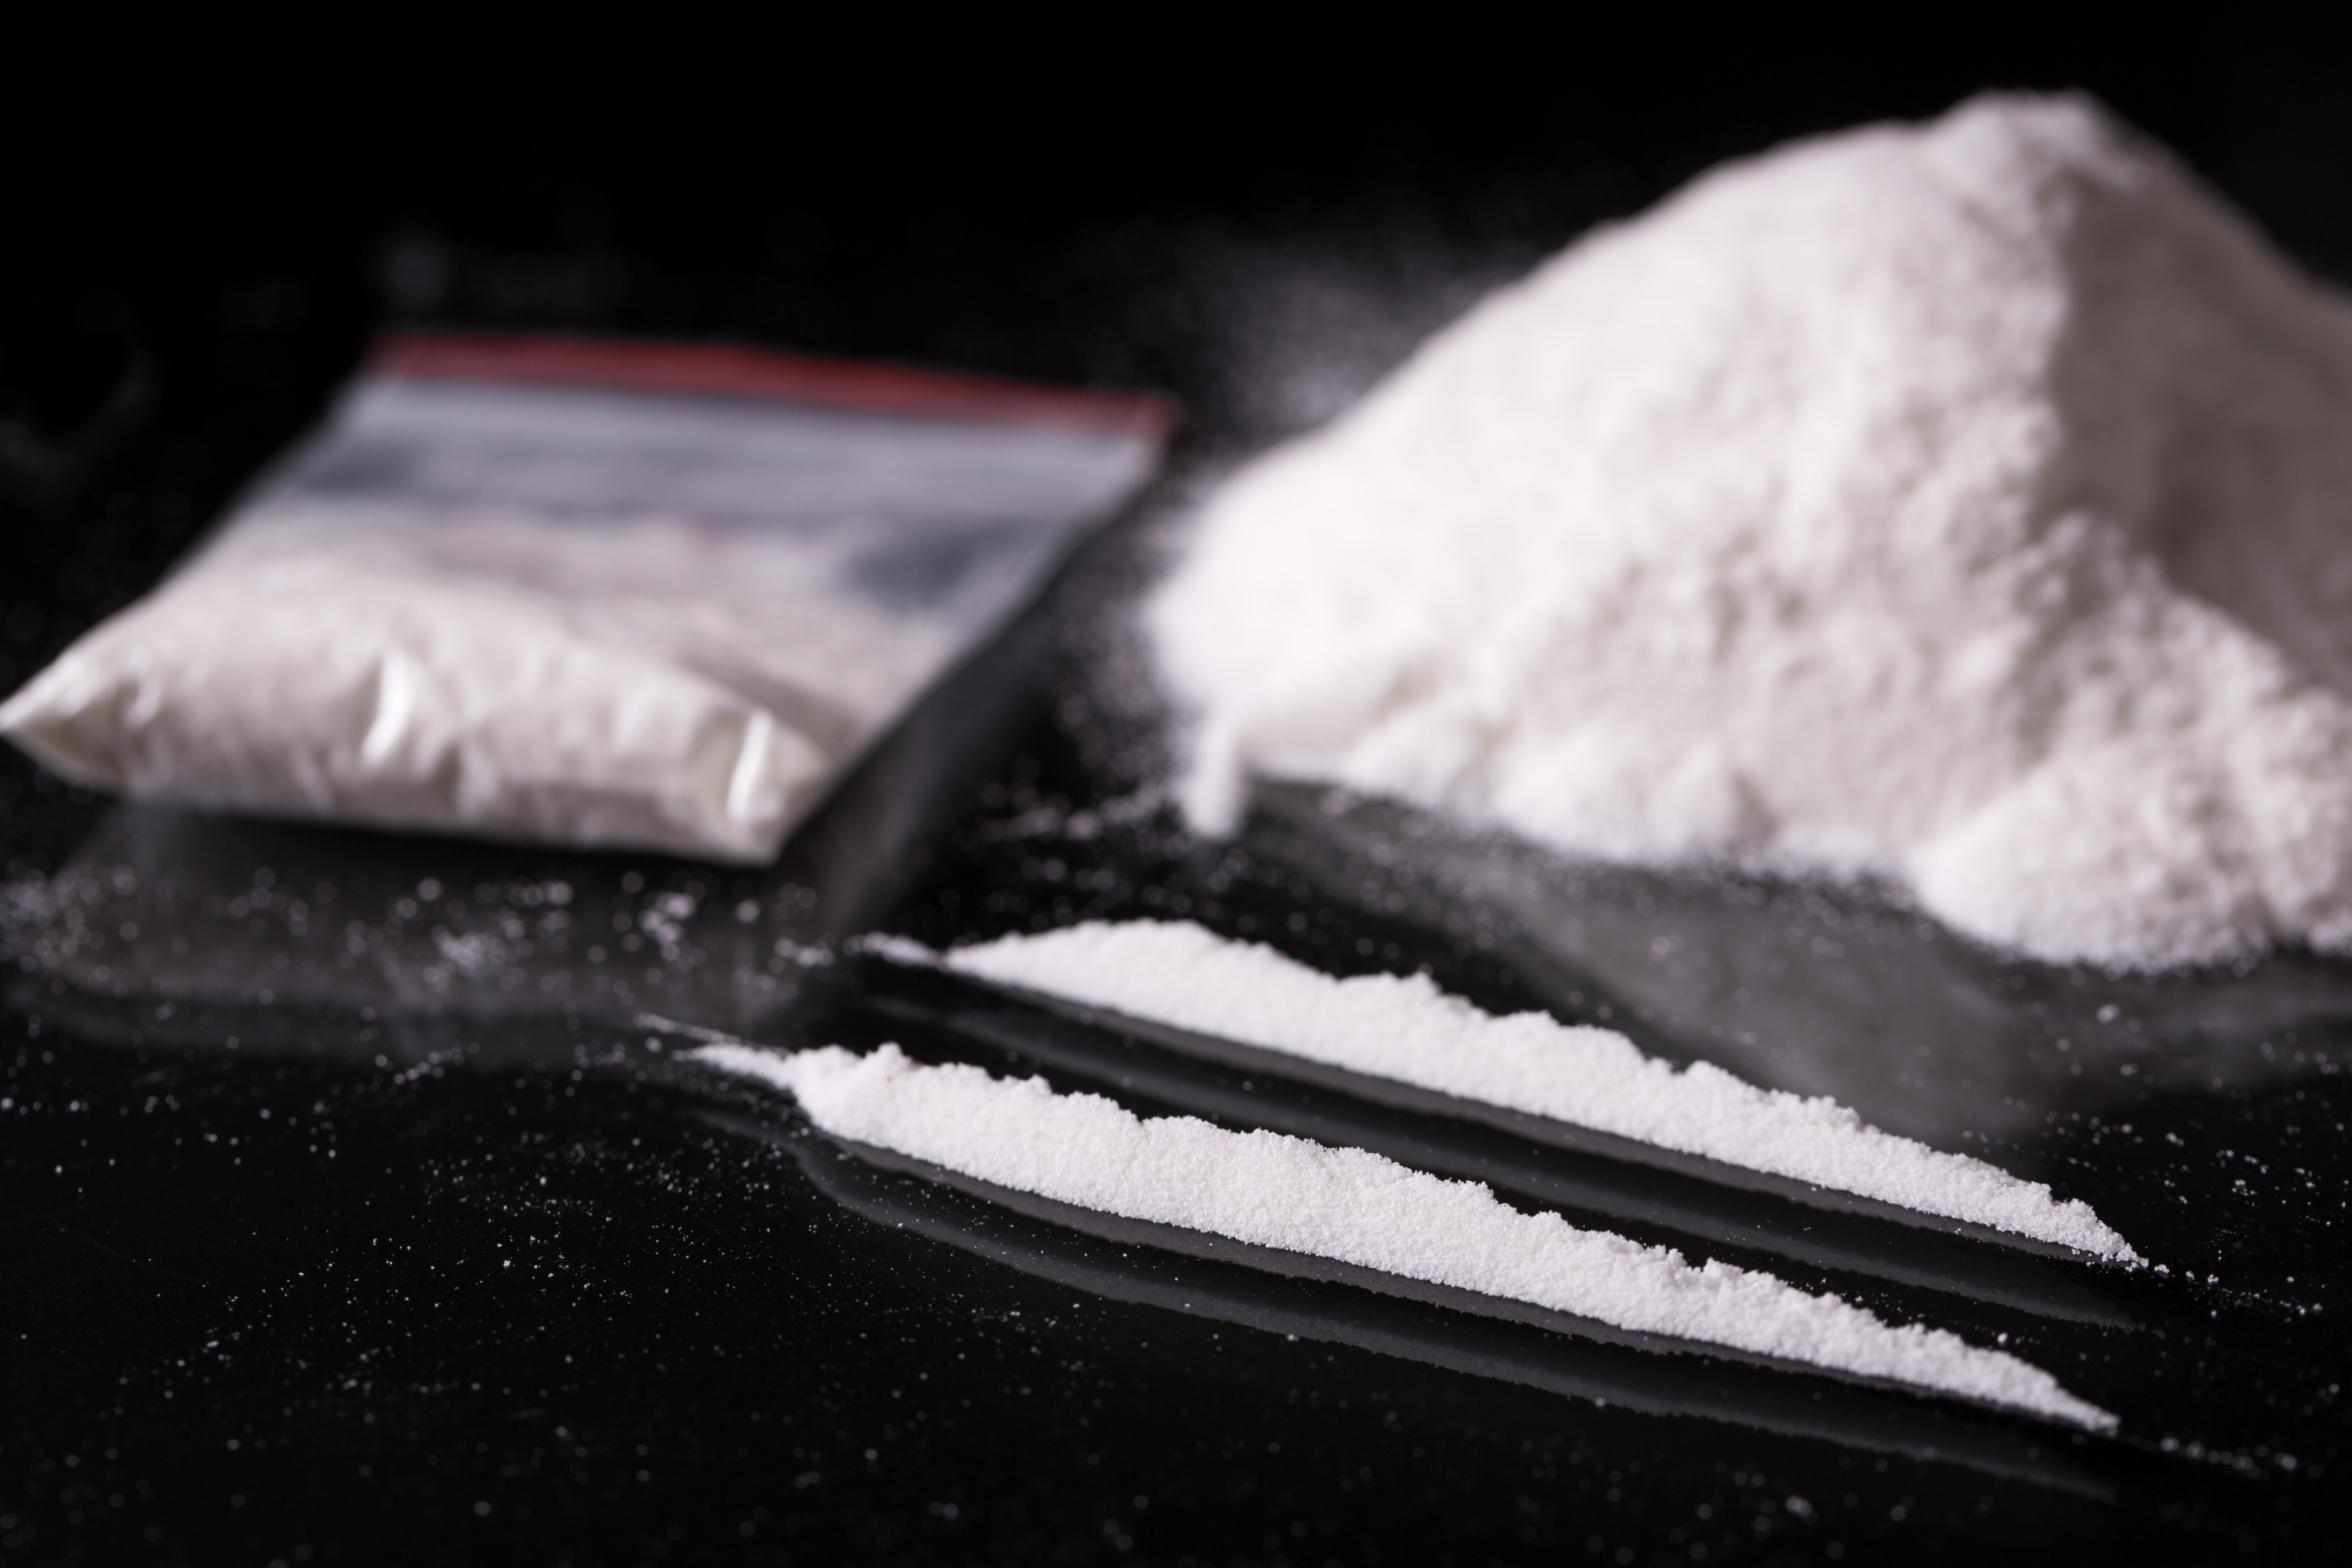 An advisory body has warned young residents over the health impacts of using cocaine. Photo: Shutterstock